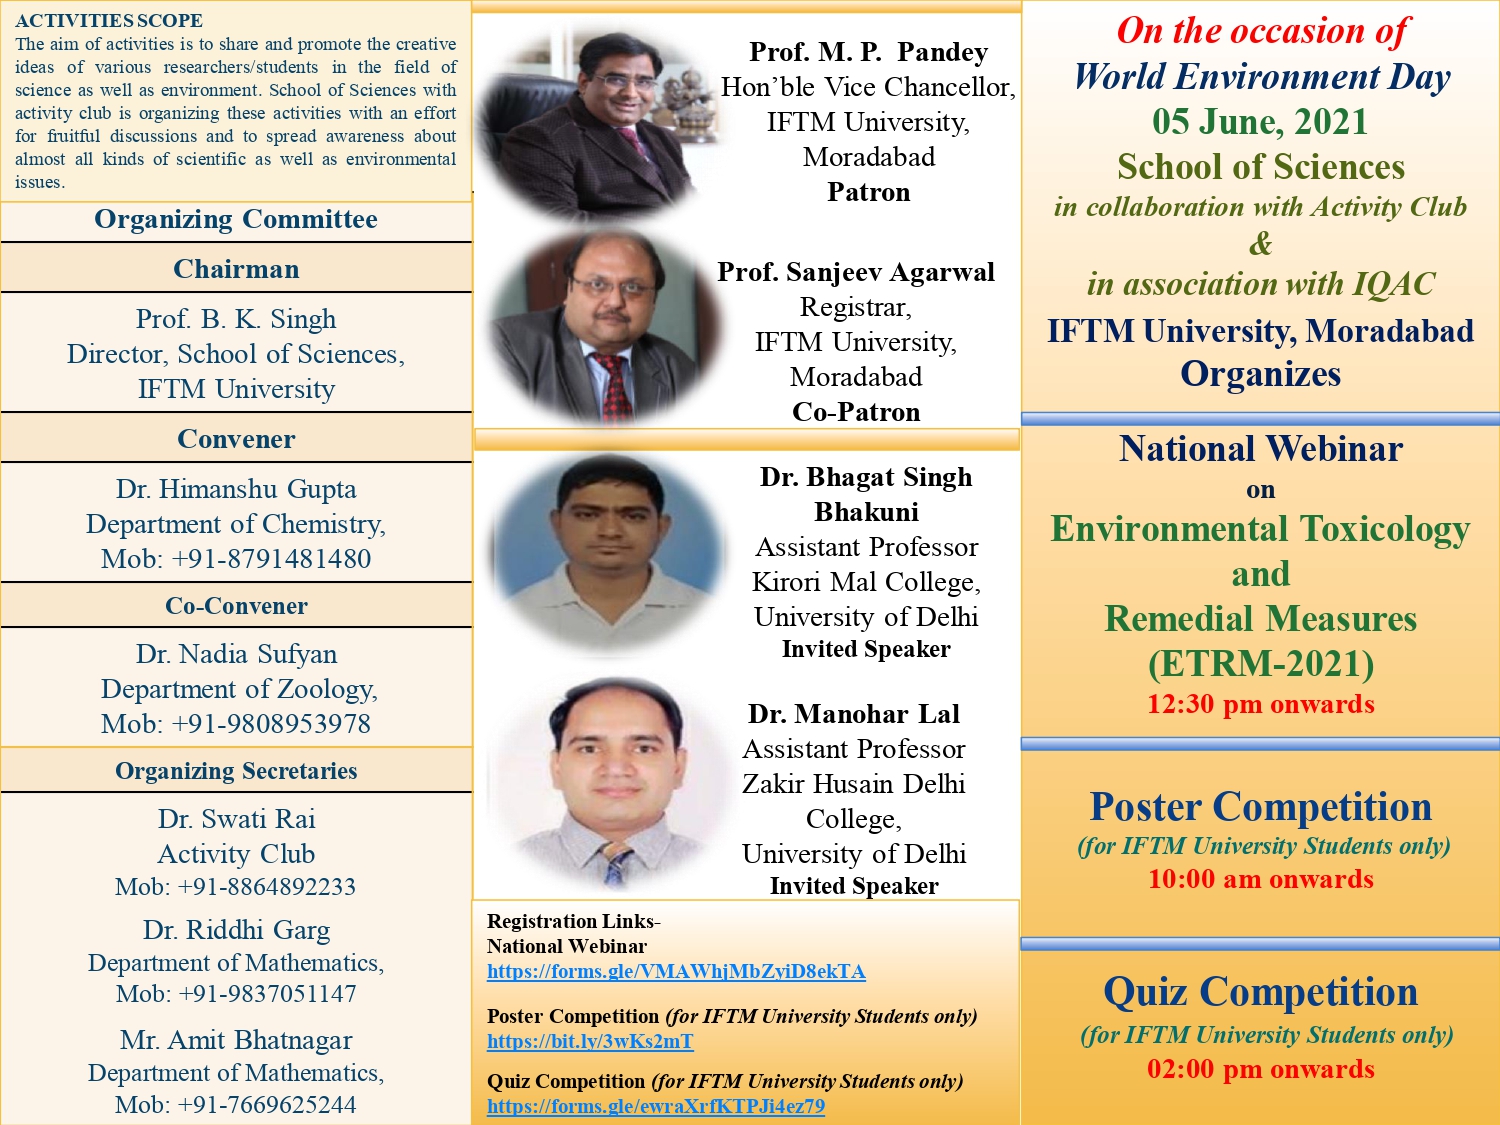  National Webinar on Environmental Toxicology and Remedial Measures